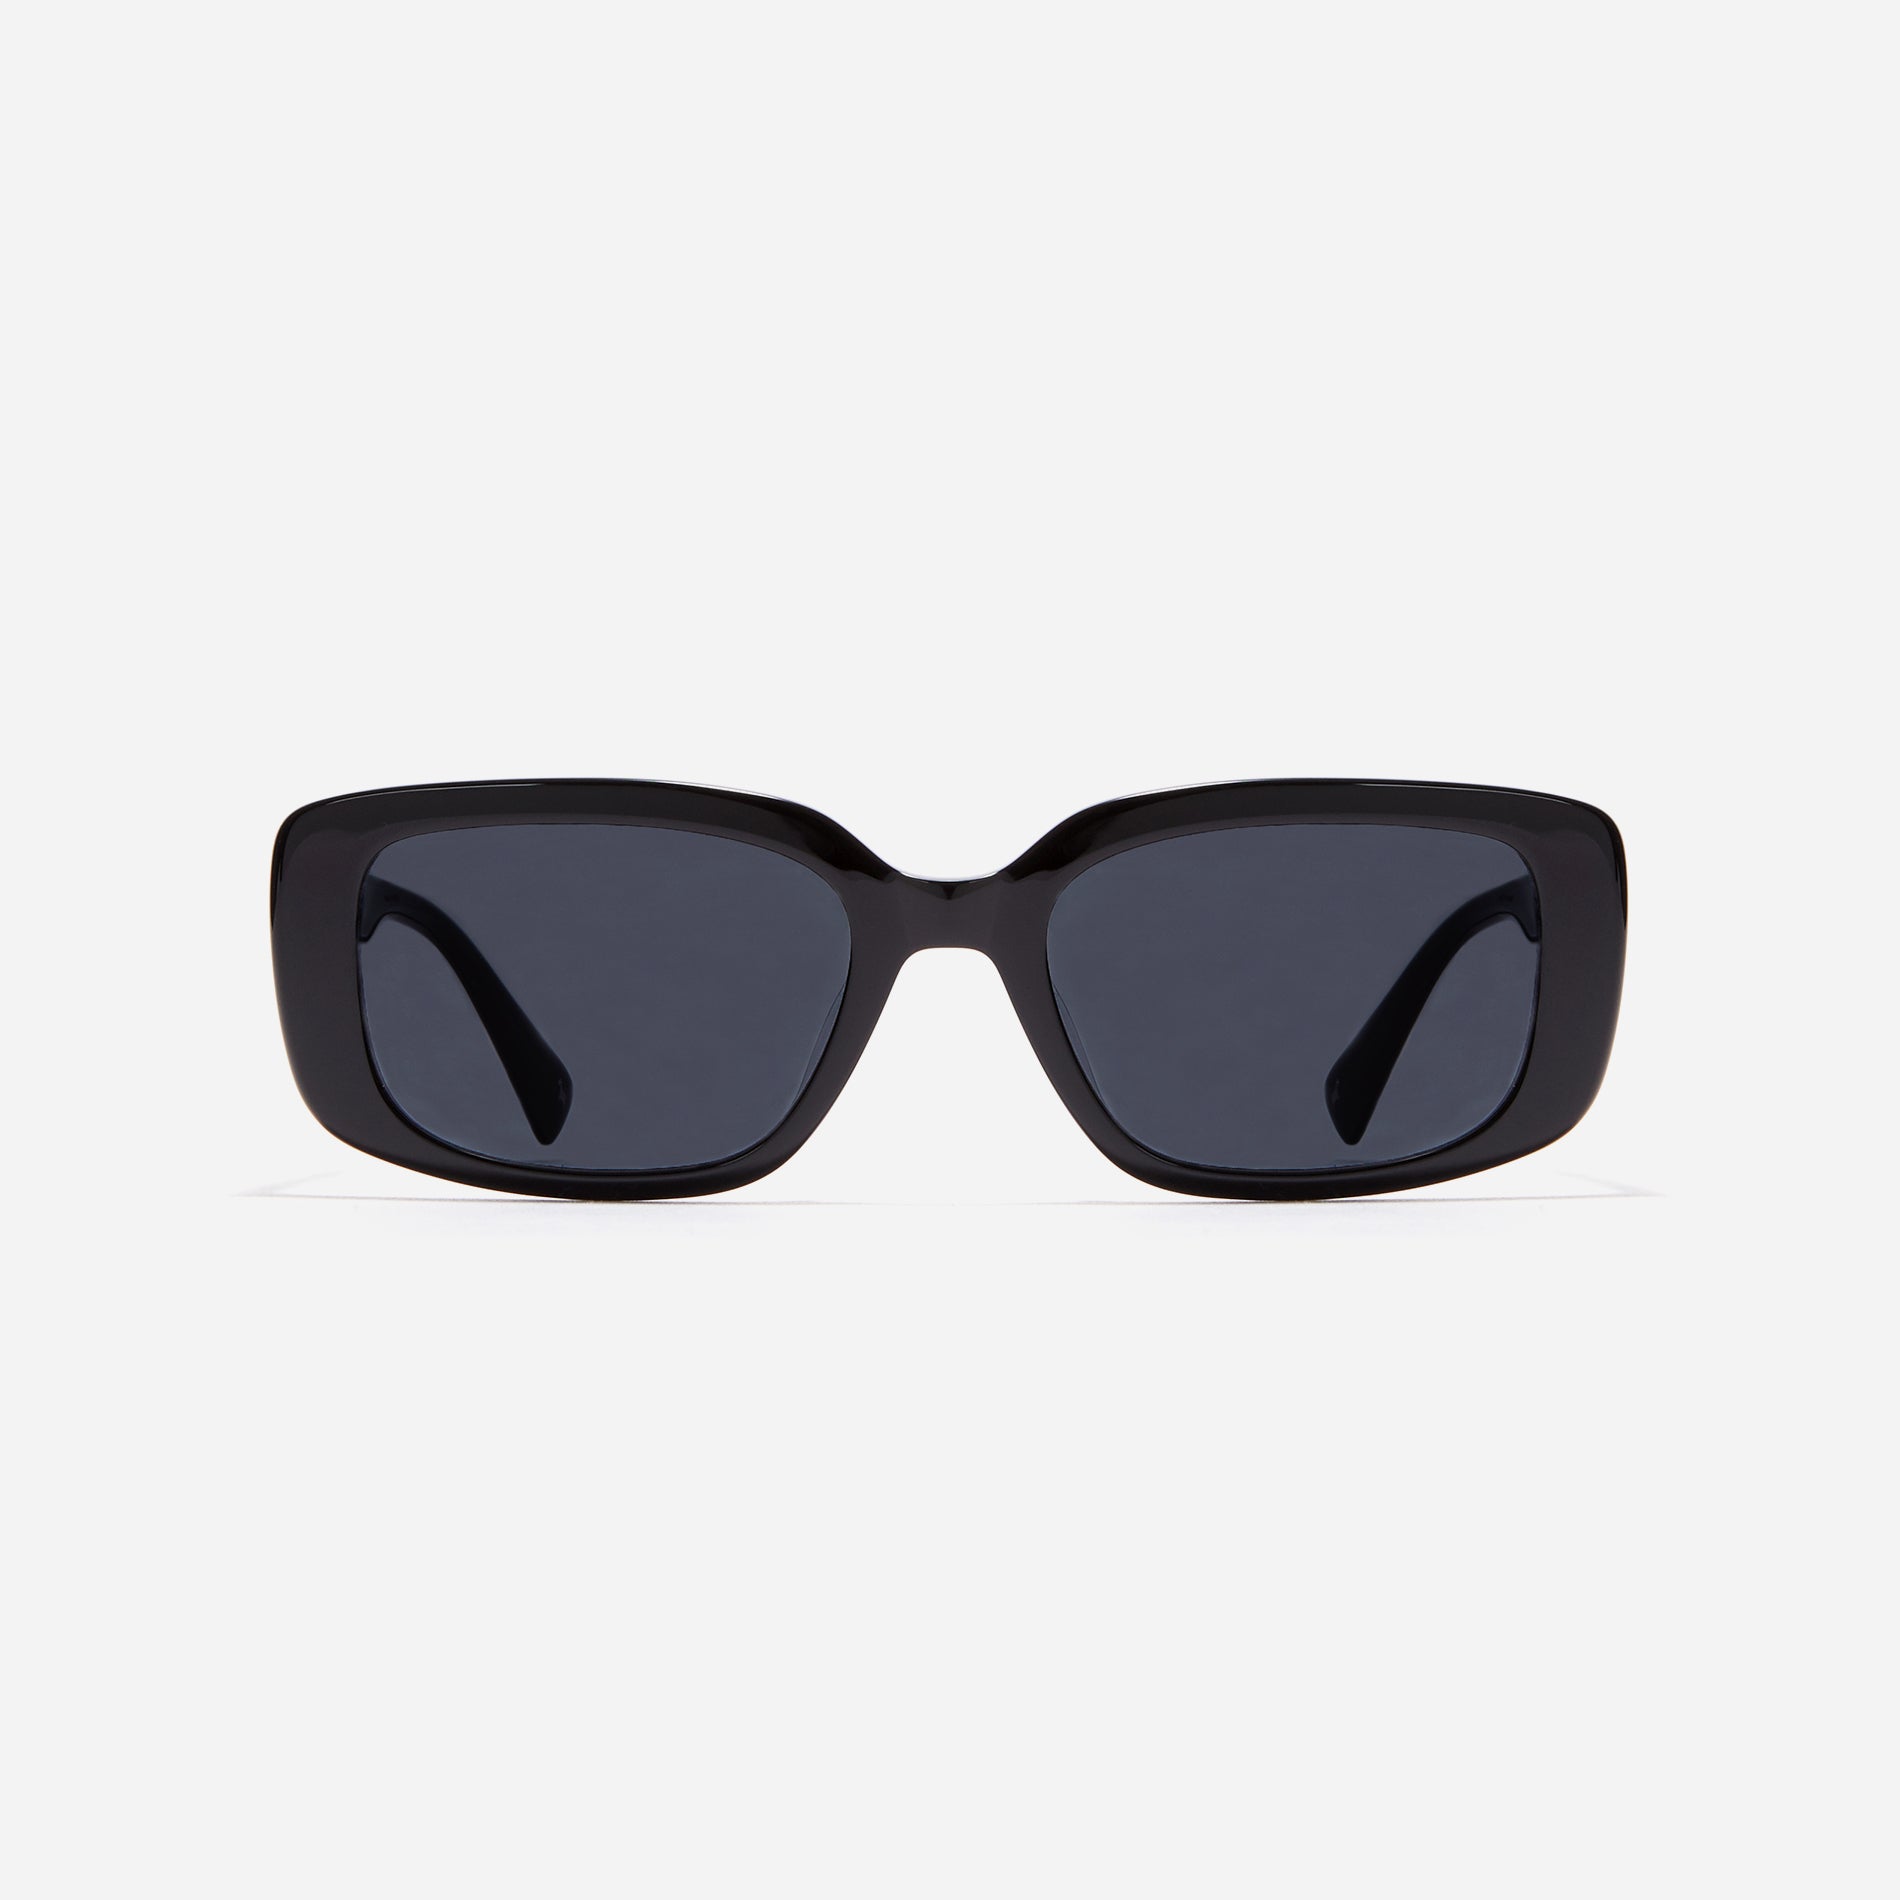 Square-shaped unisex  sunglasses with retro style inspired by '80s